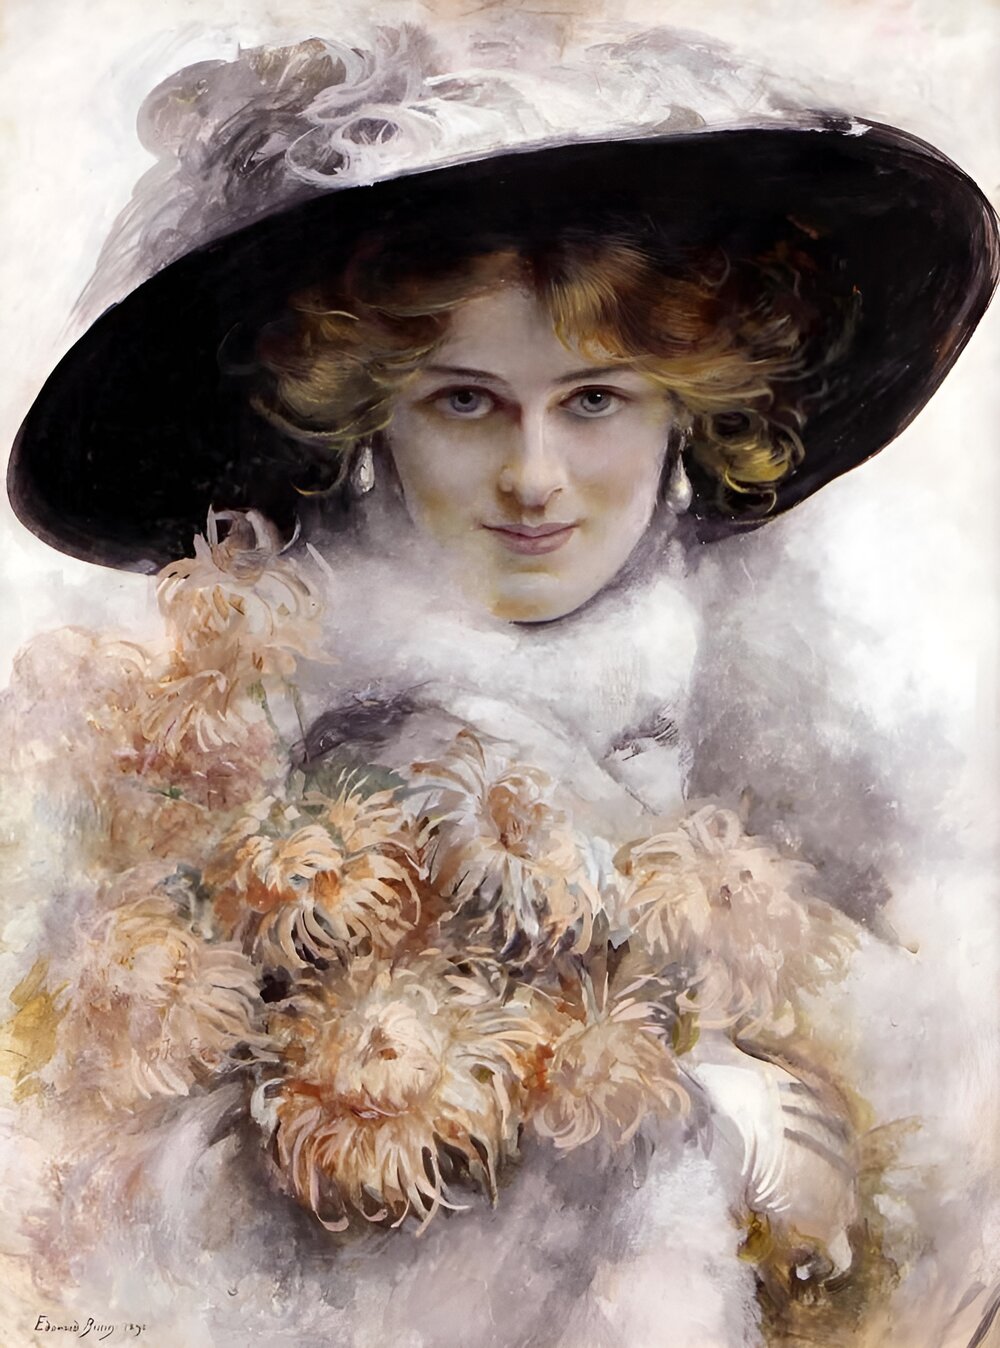 A Portrait of a Lady in a Black Hat with a Bouquet of Flowers in her Arms by Edouard Bisson, 1895